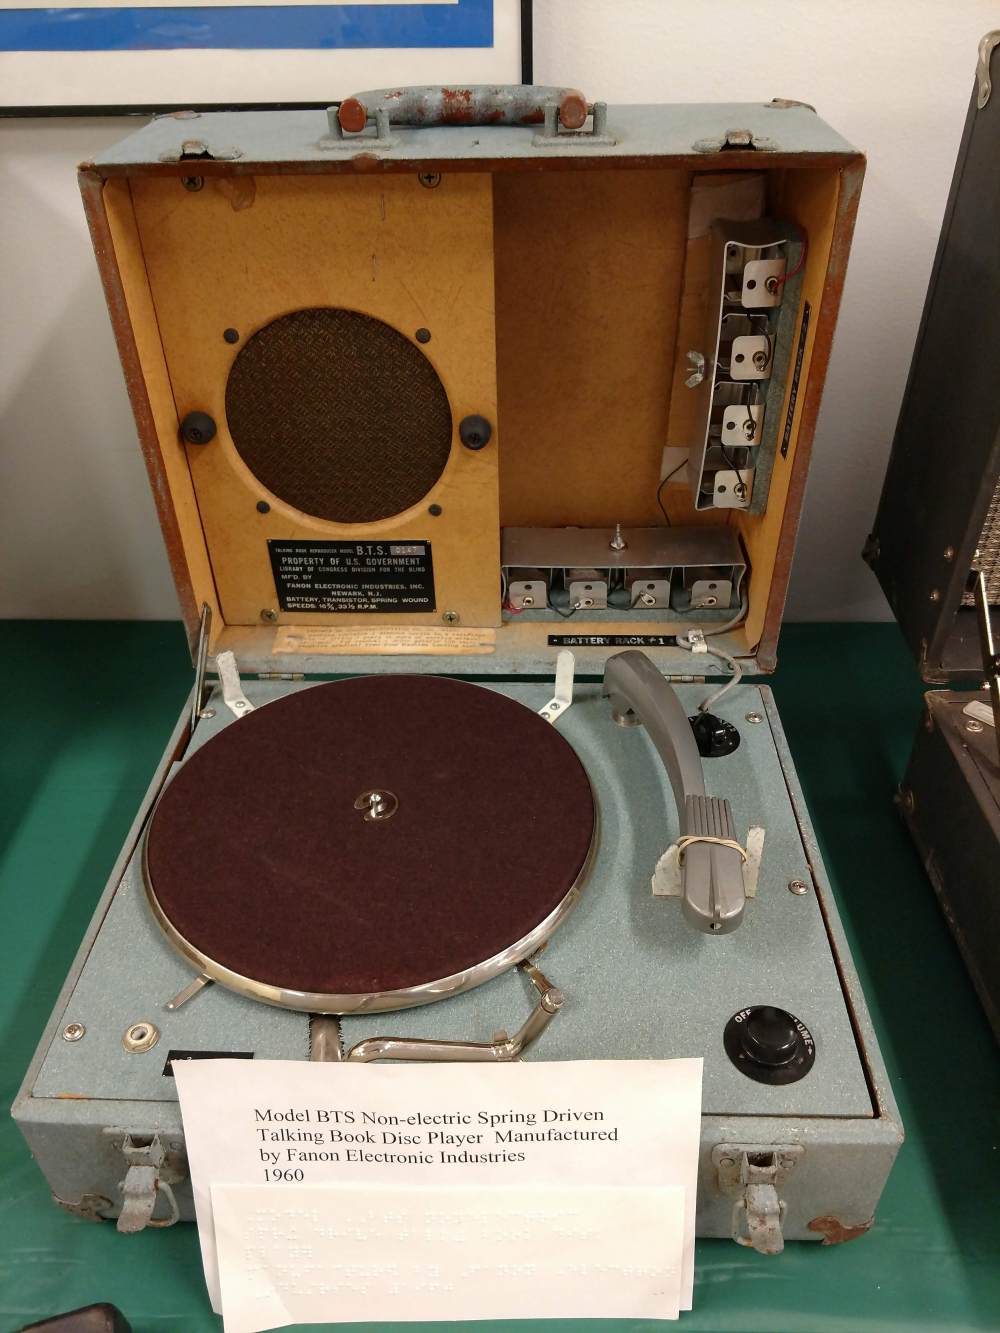 Model BTS Non-electric Spring Driven Talking Book Record Player Manufactured by Fanon Electronic Industries, 1960.